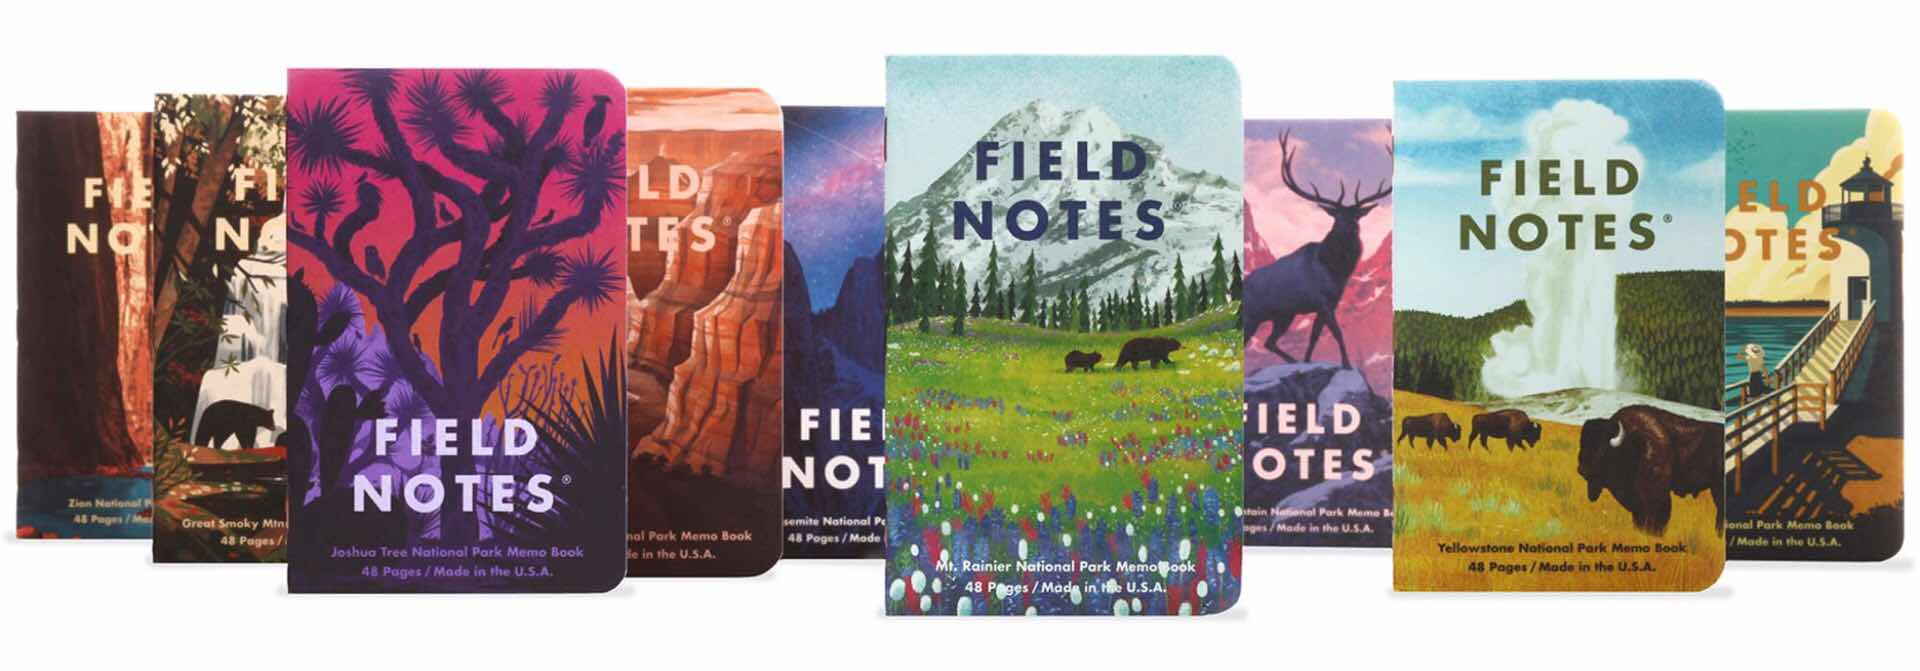 field-notes-national-parks-series-edition